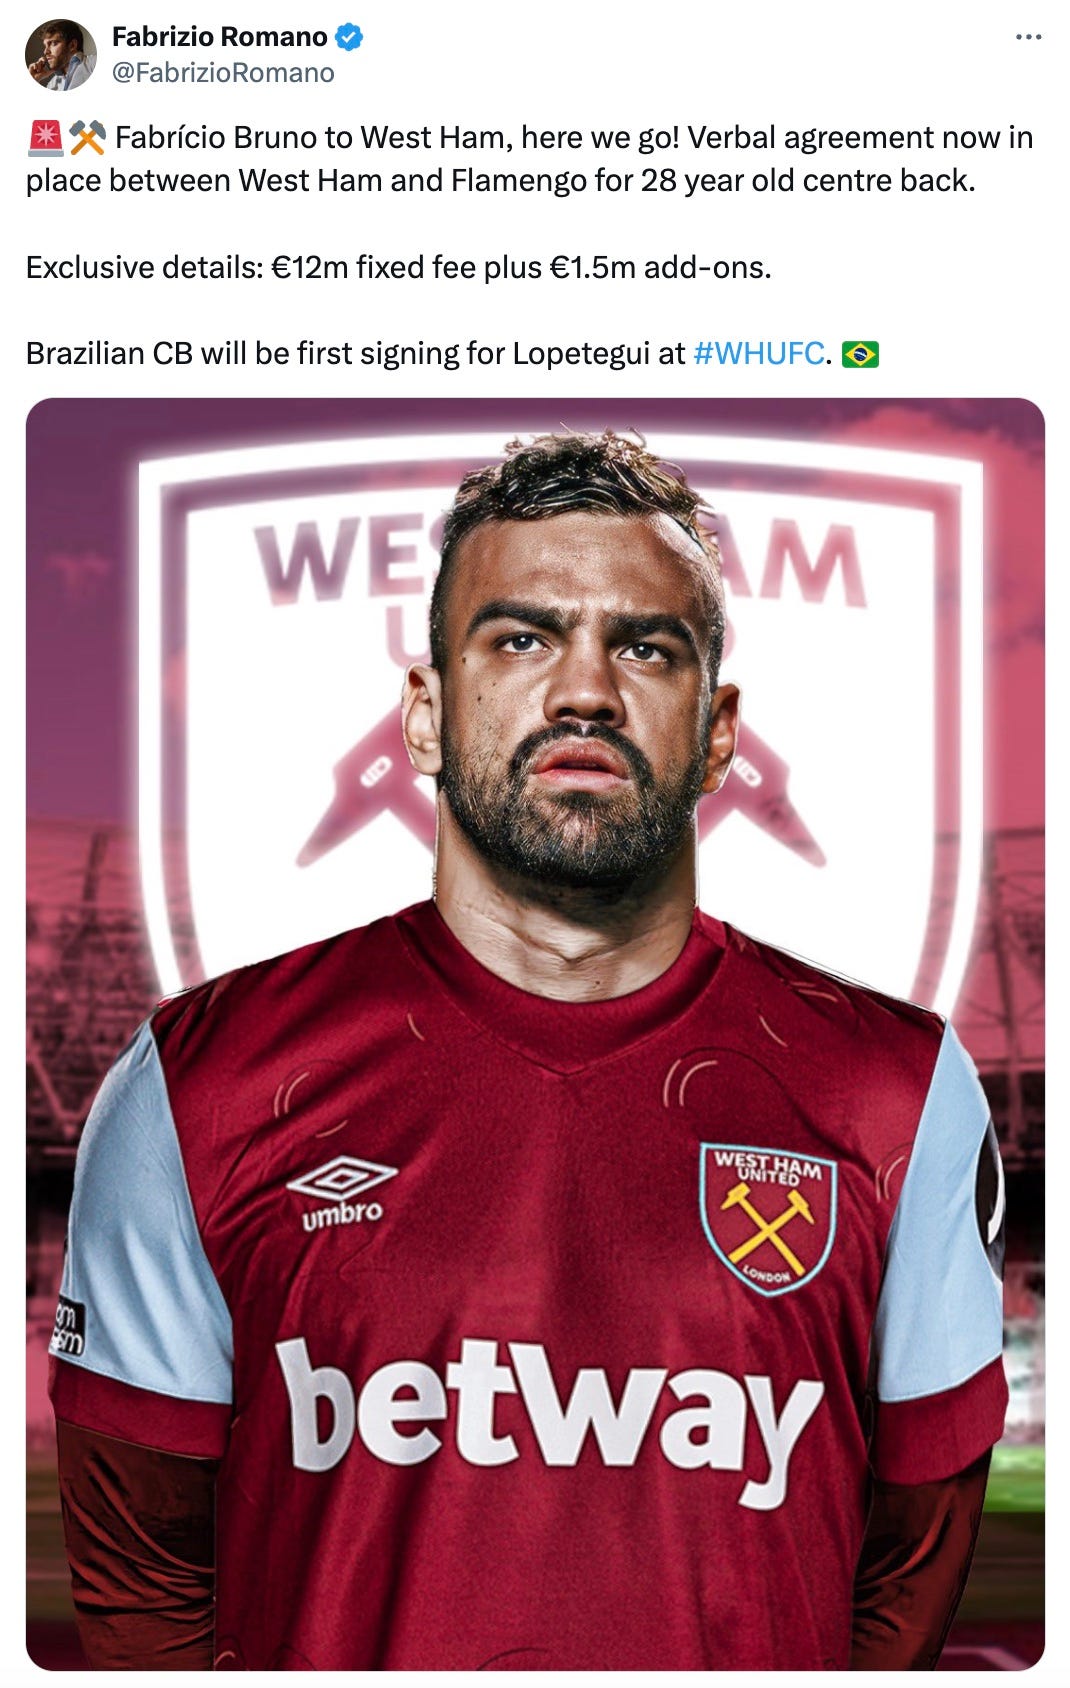 A tweet by Fabrizio Romano about West Ham agreeing a deal to sign Fabricio Bruno